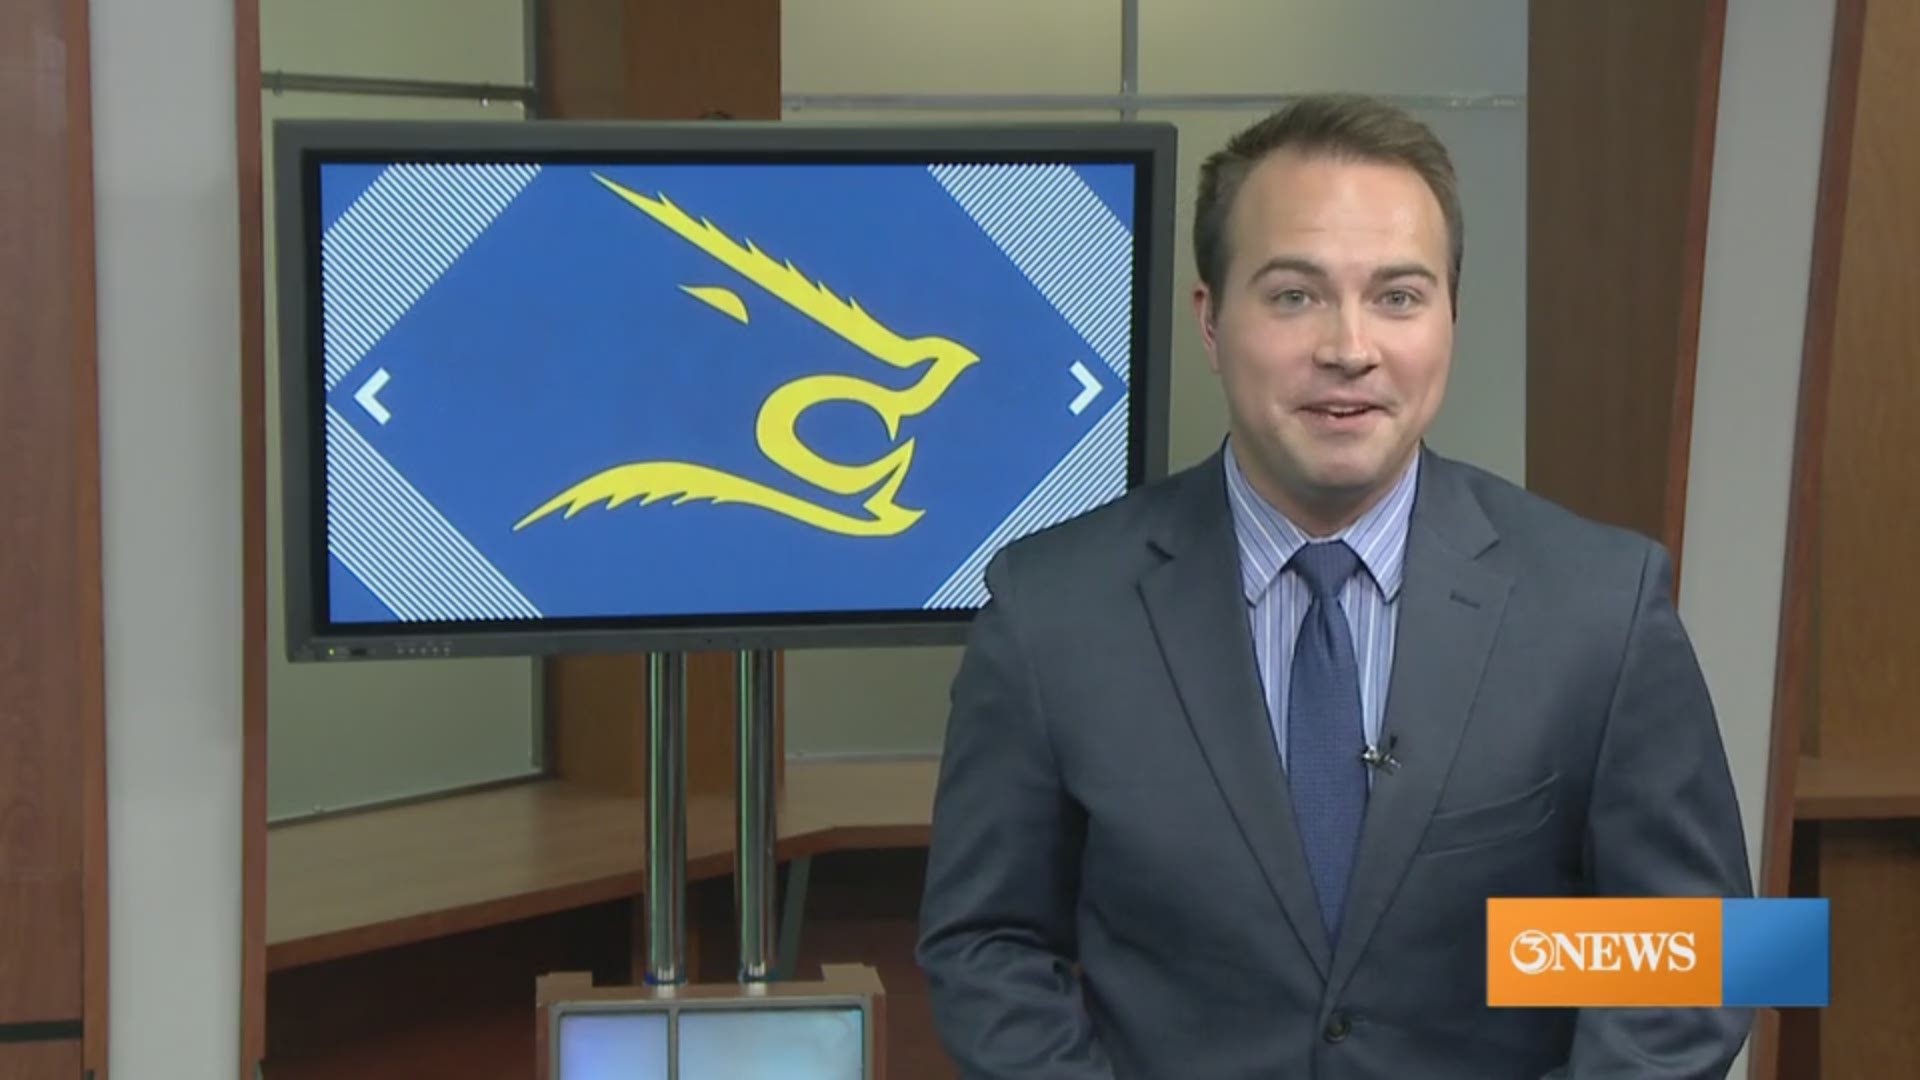 Highlights and postgame reaction from all three National Championship games between Texas A&M-Kingsville and Augustana.